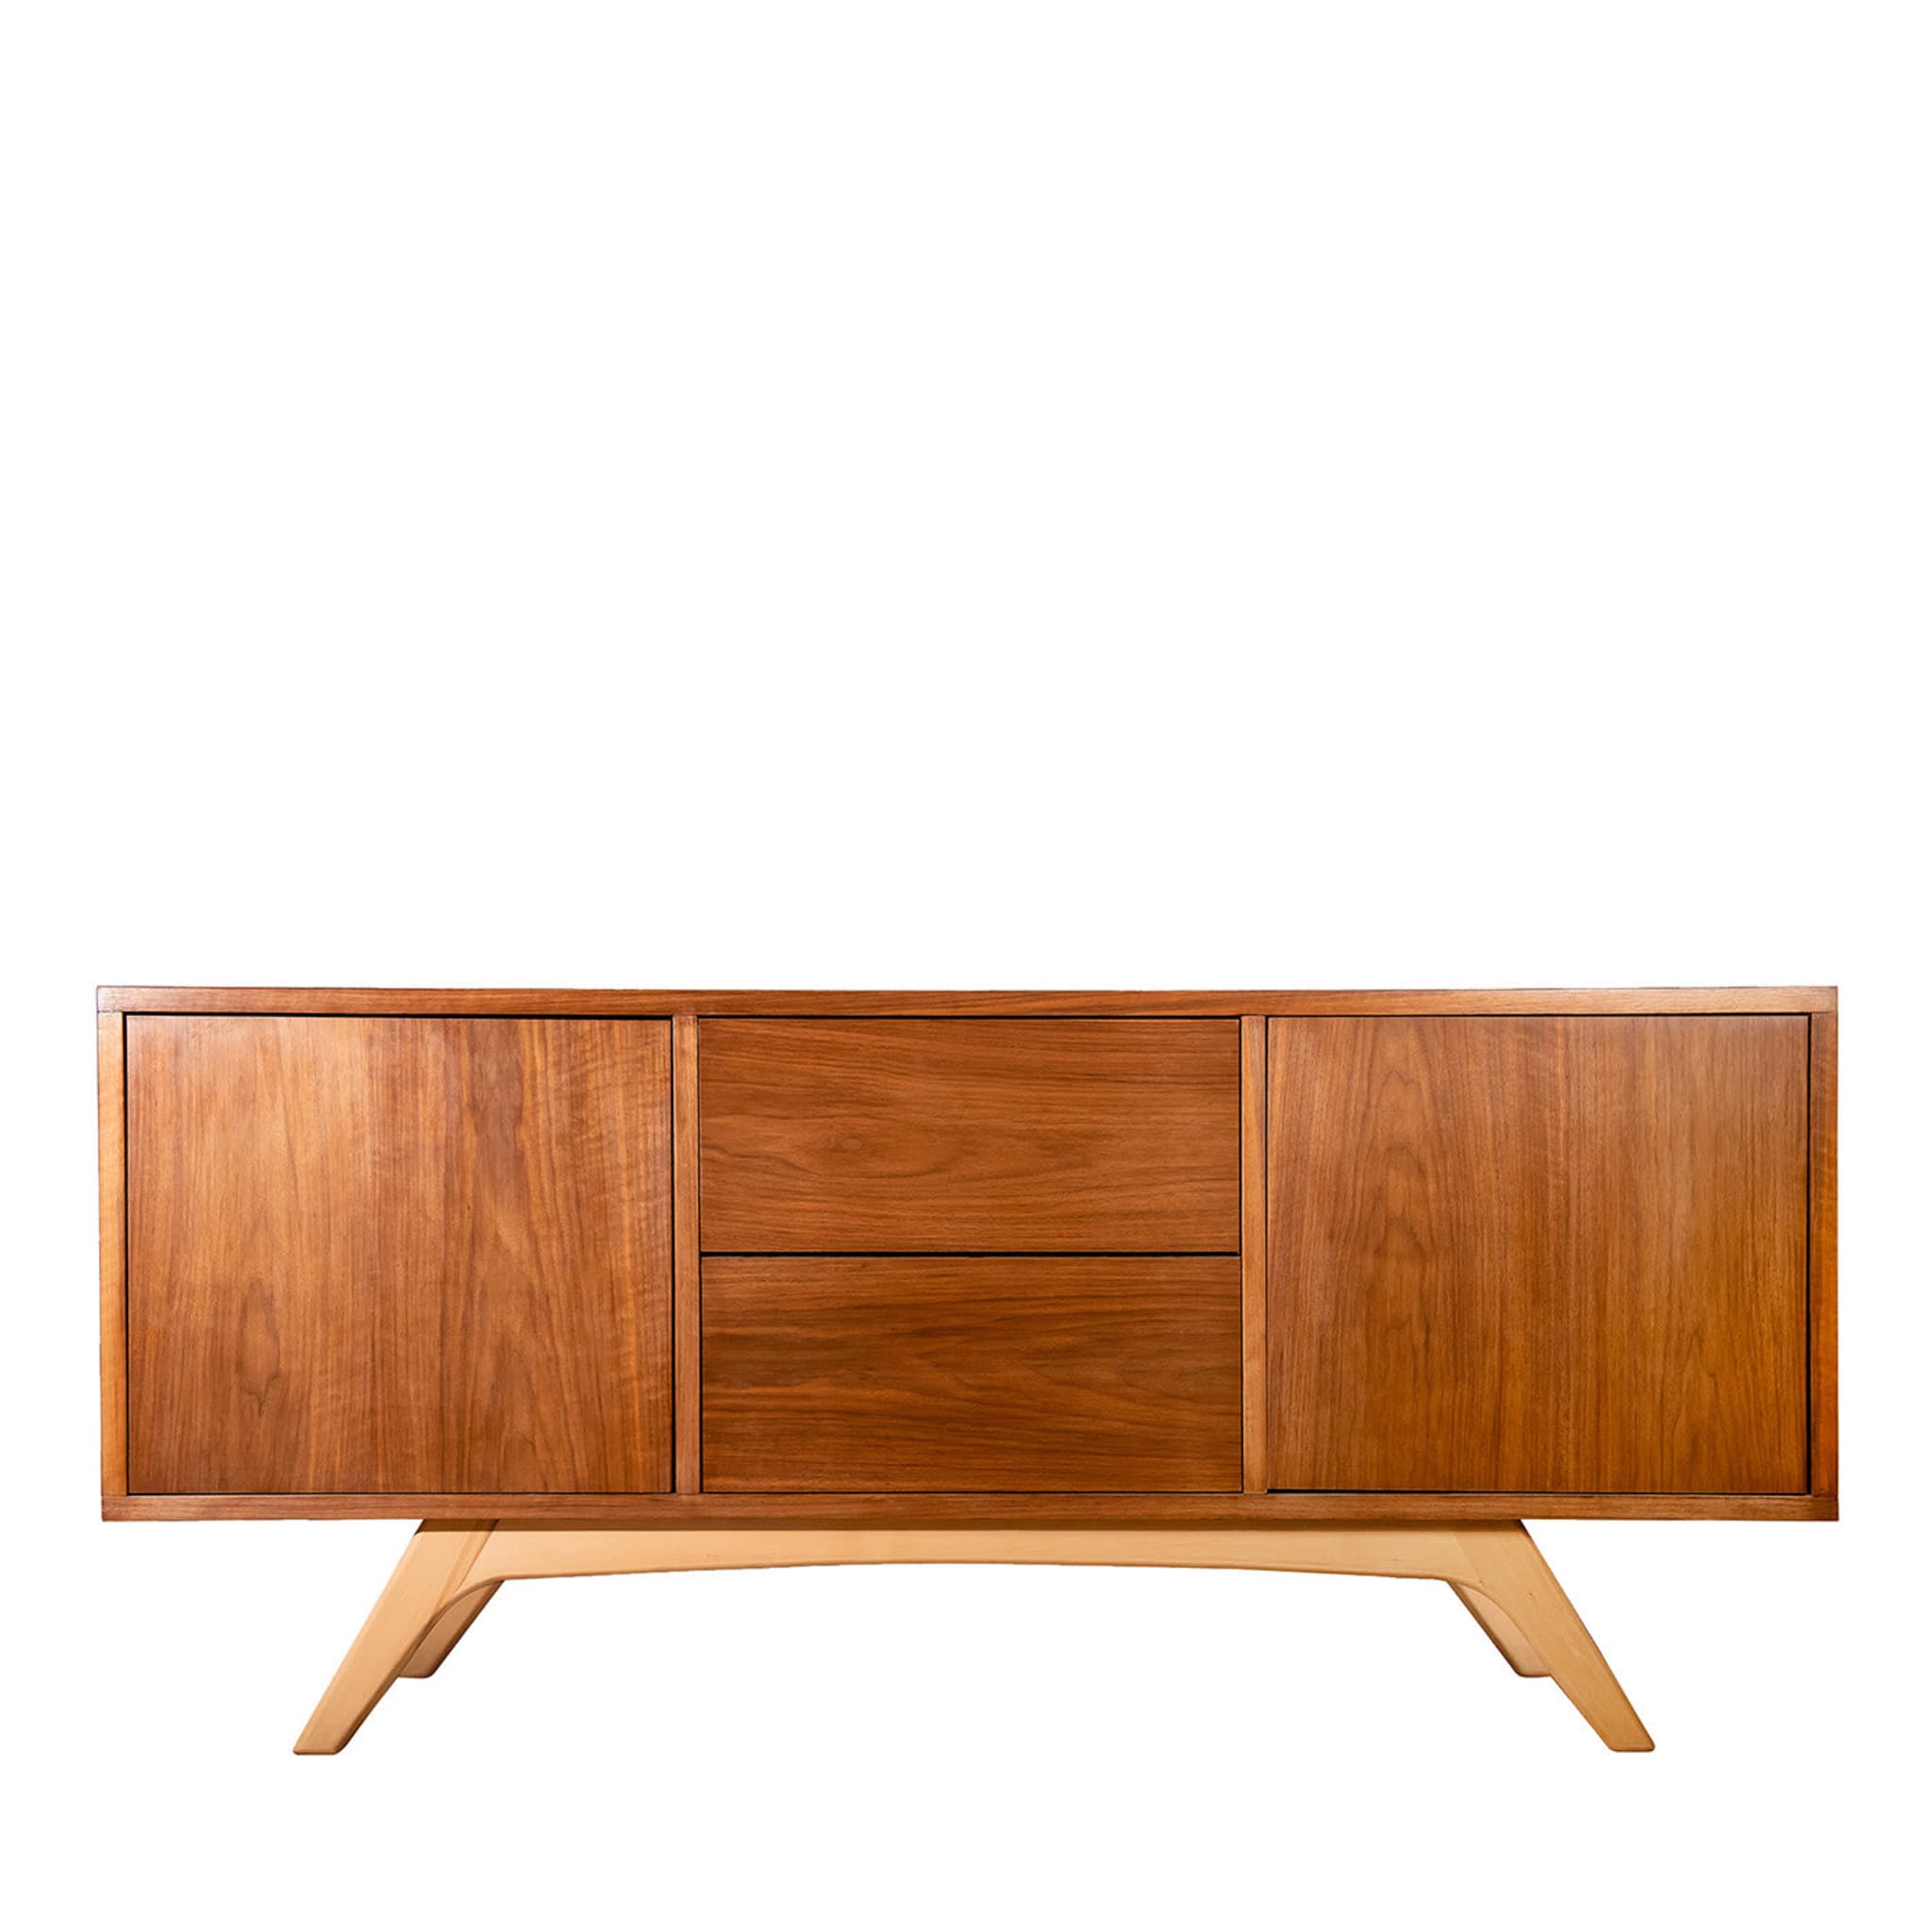 Canaletto Sideboard by Erika Gambella - Main view